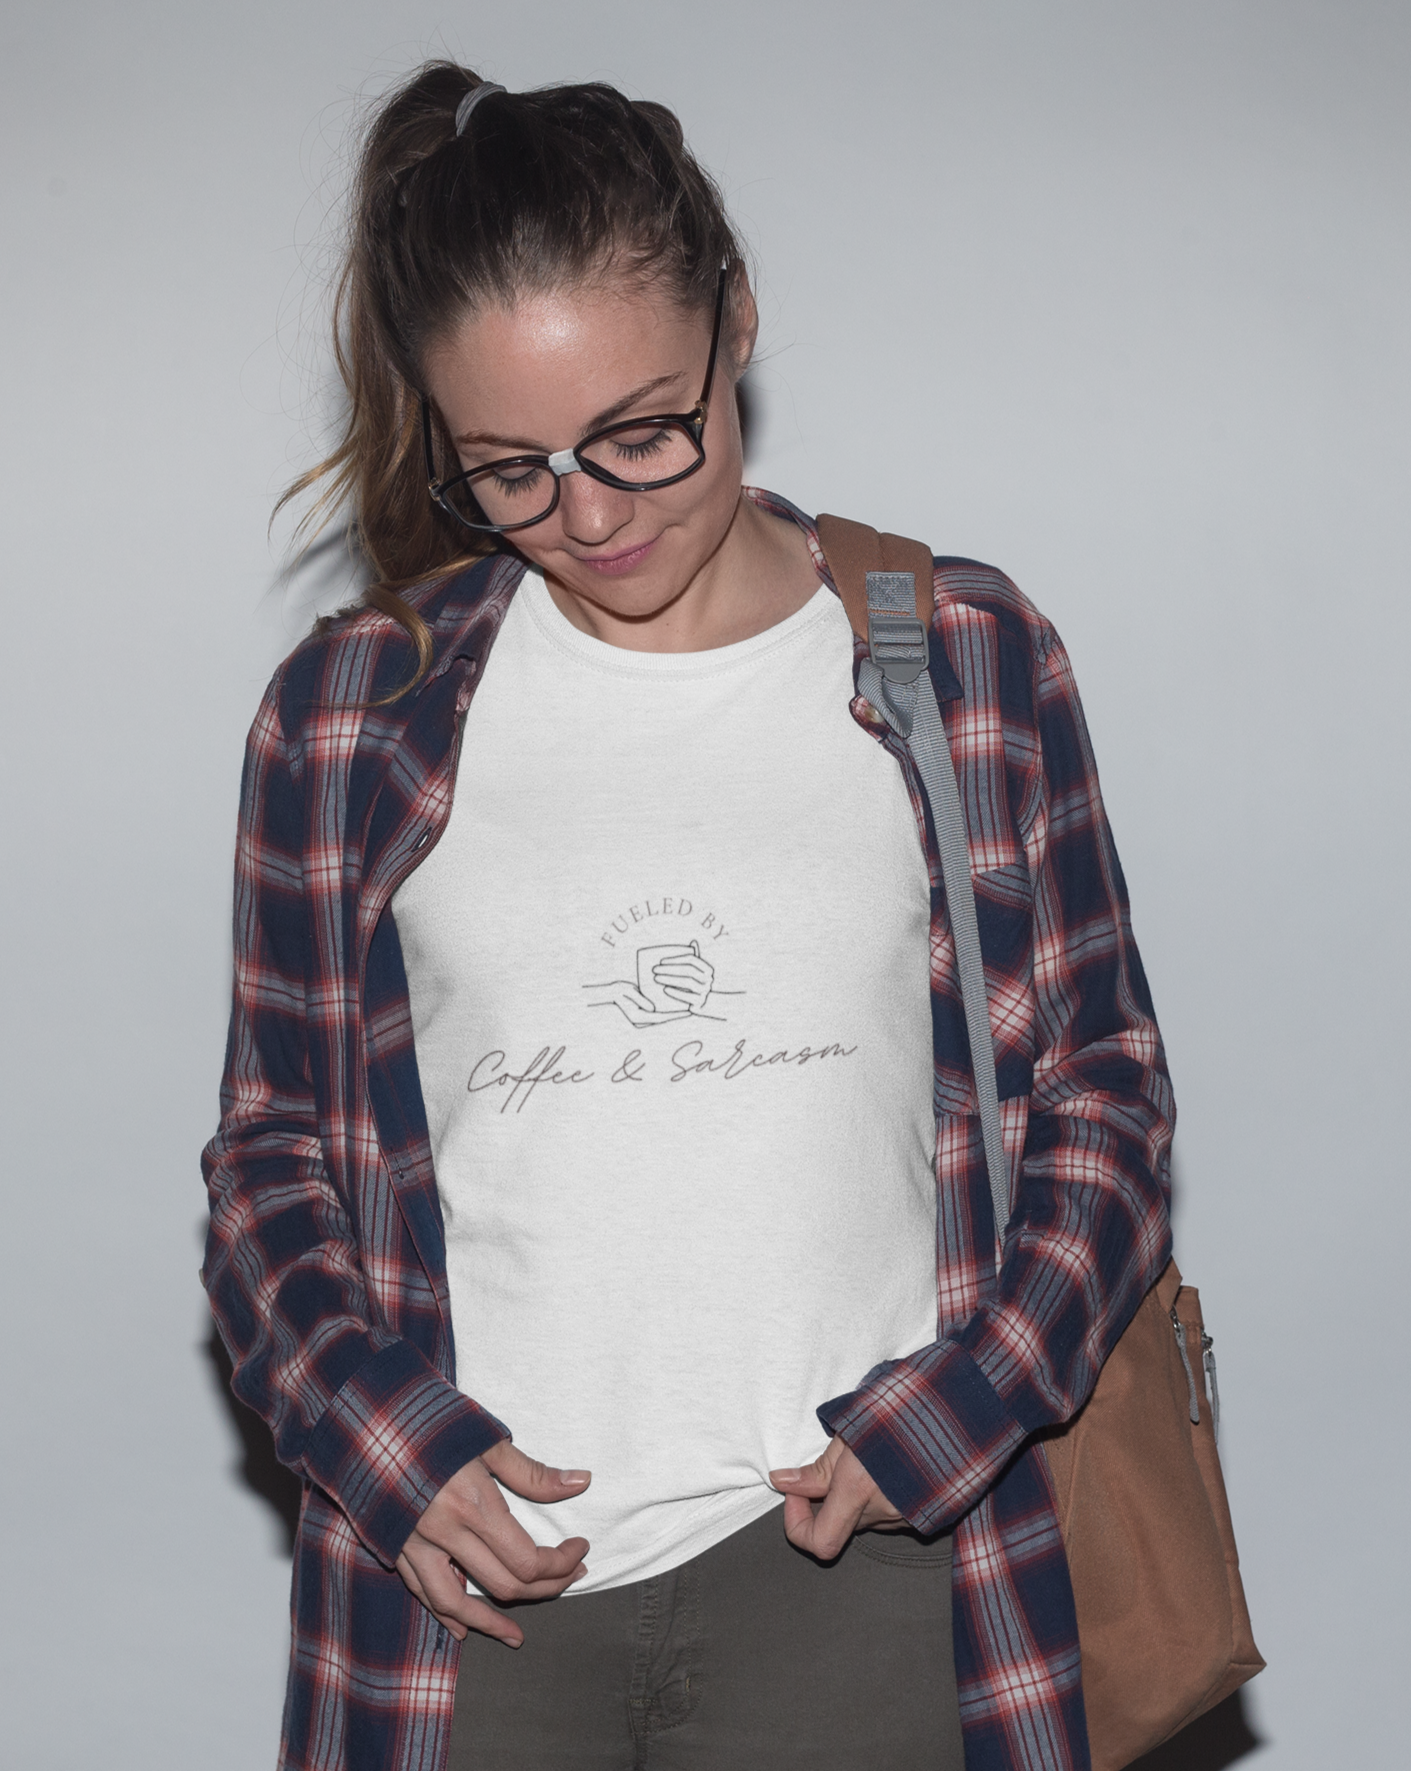 Fueled by coffee and sarcasm, that's all there is to it. Show off your love for coffee and sass with this graphic t-shirt. Designed with a soft cotton, you can stay comfortable on your way to the coffee shop with a whole bunch of attitude. 